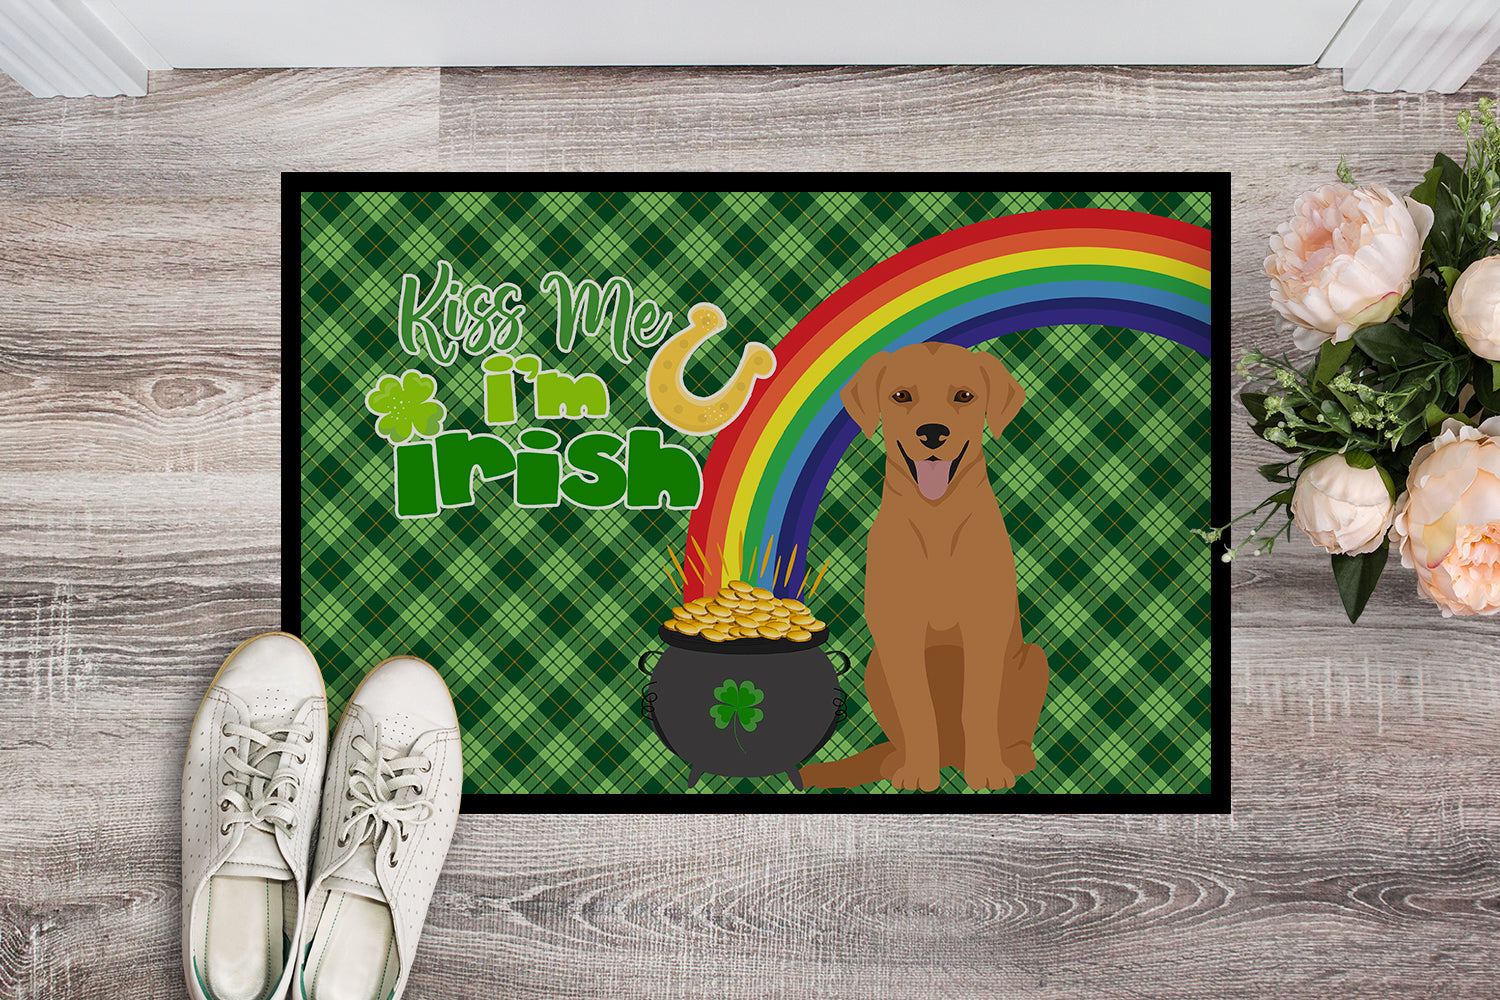 Buy this Red Fox Labrador Retriever St. Patrick's Day Indoor or Outdoor Mat 24x36